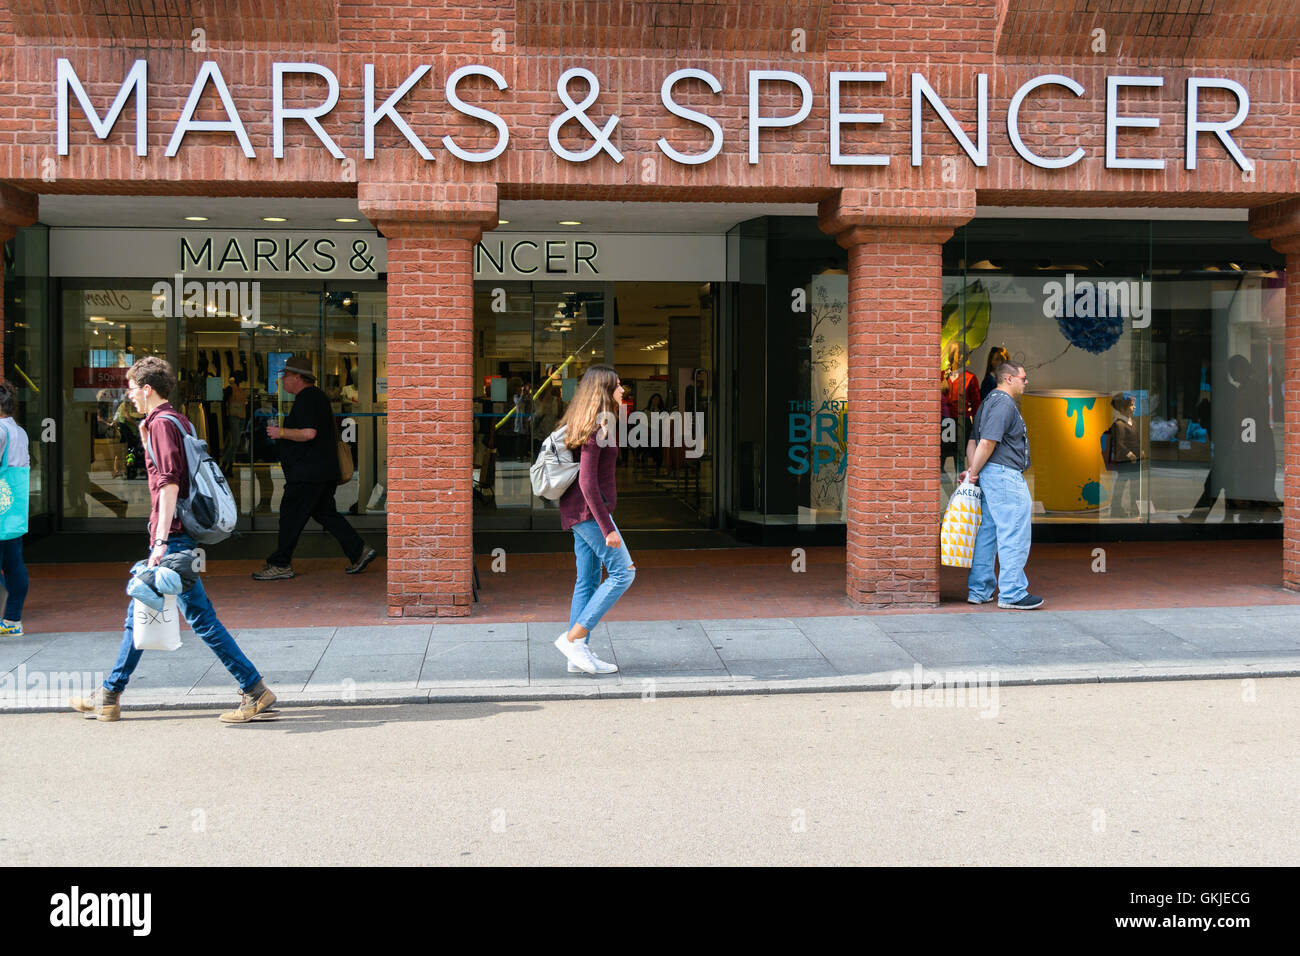 Exeter, United Kingdom - August 18, 2016: Exterior of the Marks & Spencer store in Exeter. Stock Photo